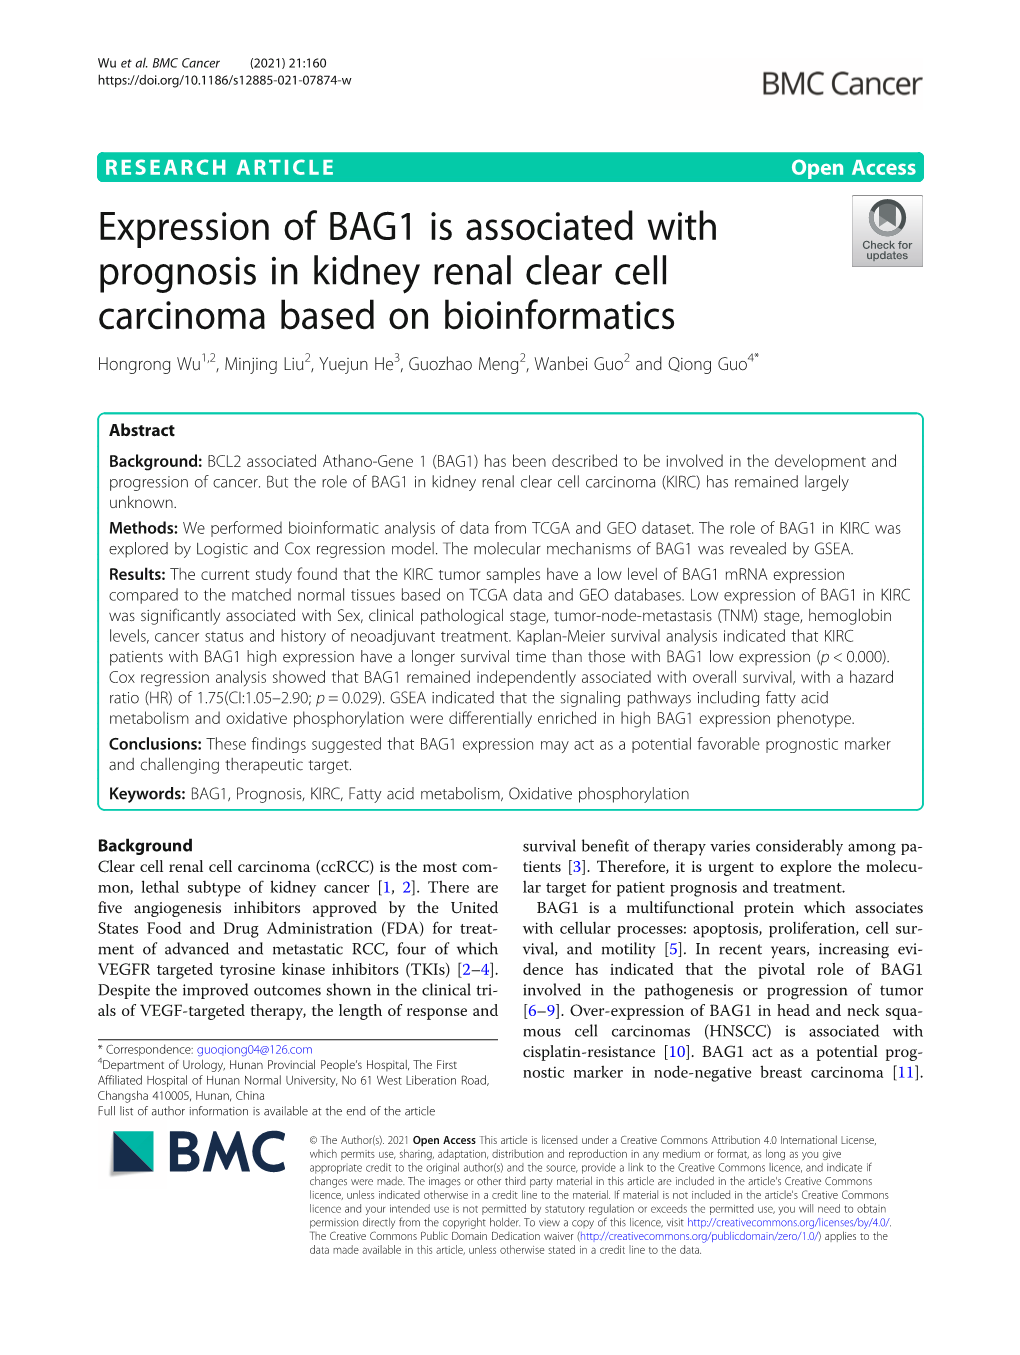 Expression of BAG1 Is Associated with Prognosis in Kidney Renal Clear Cell